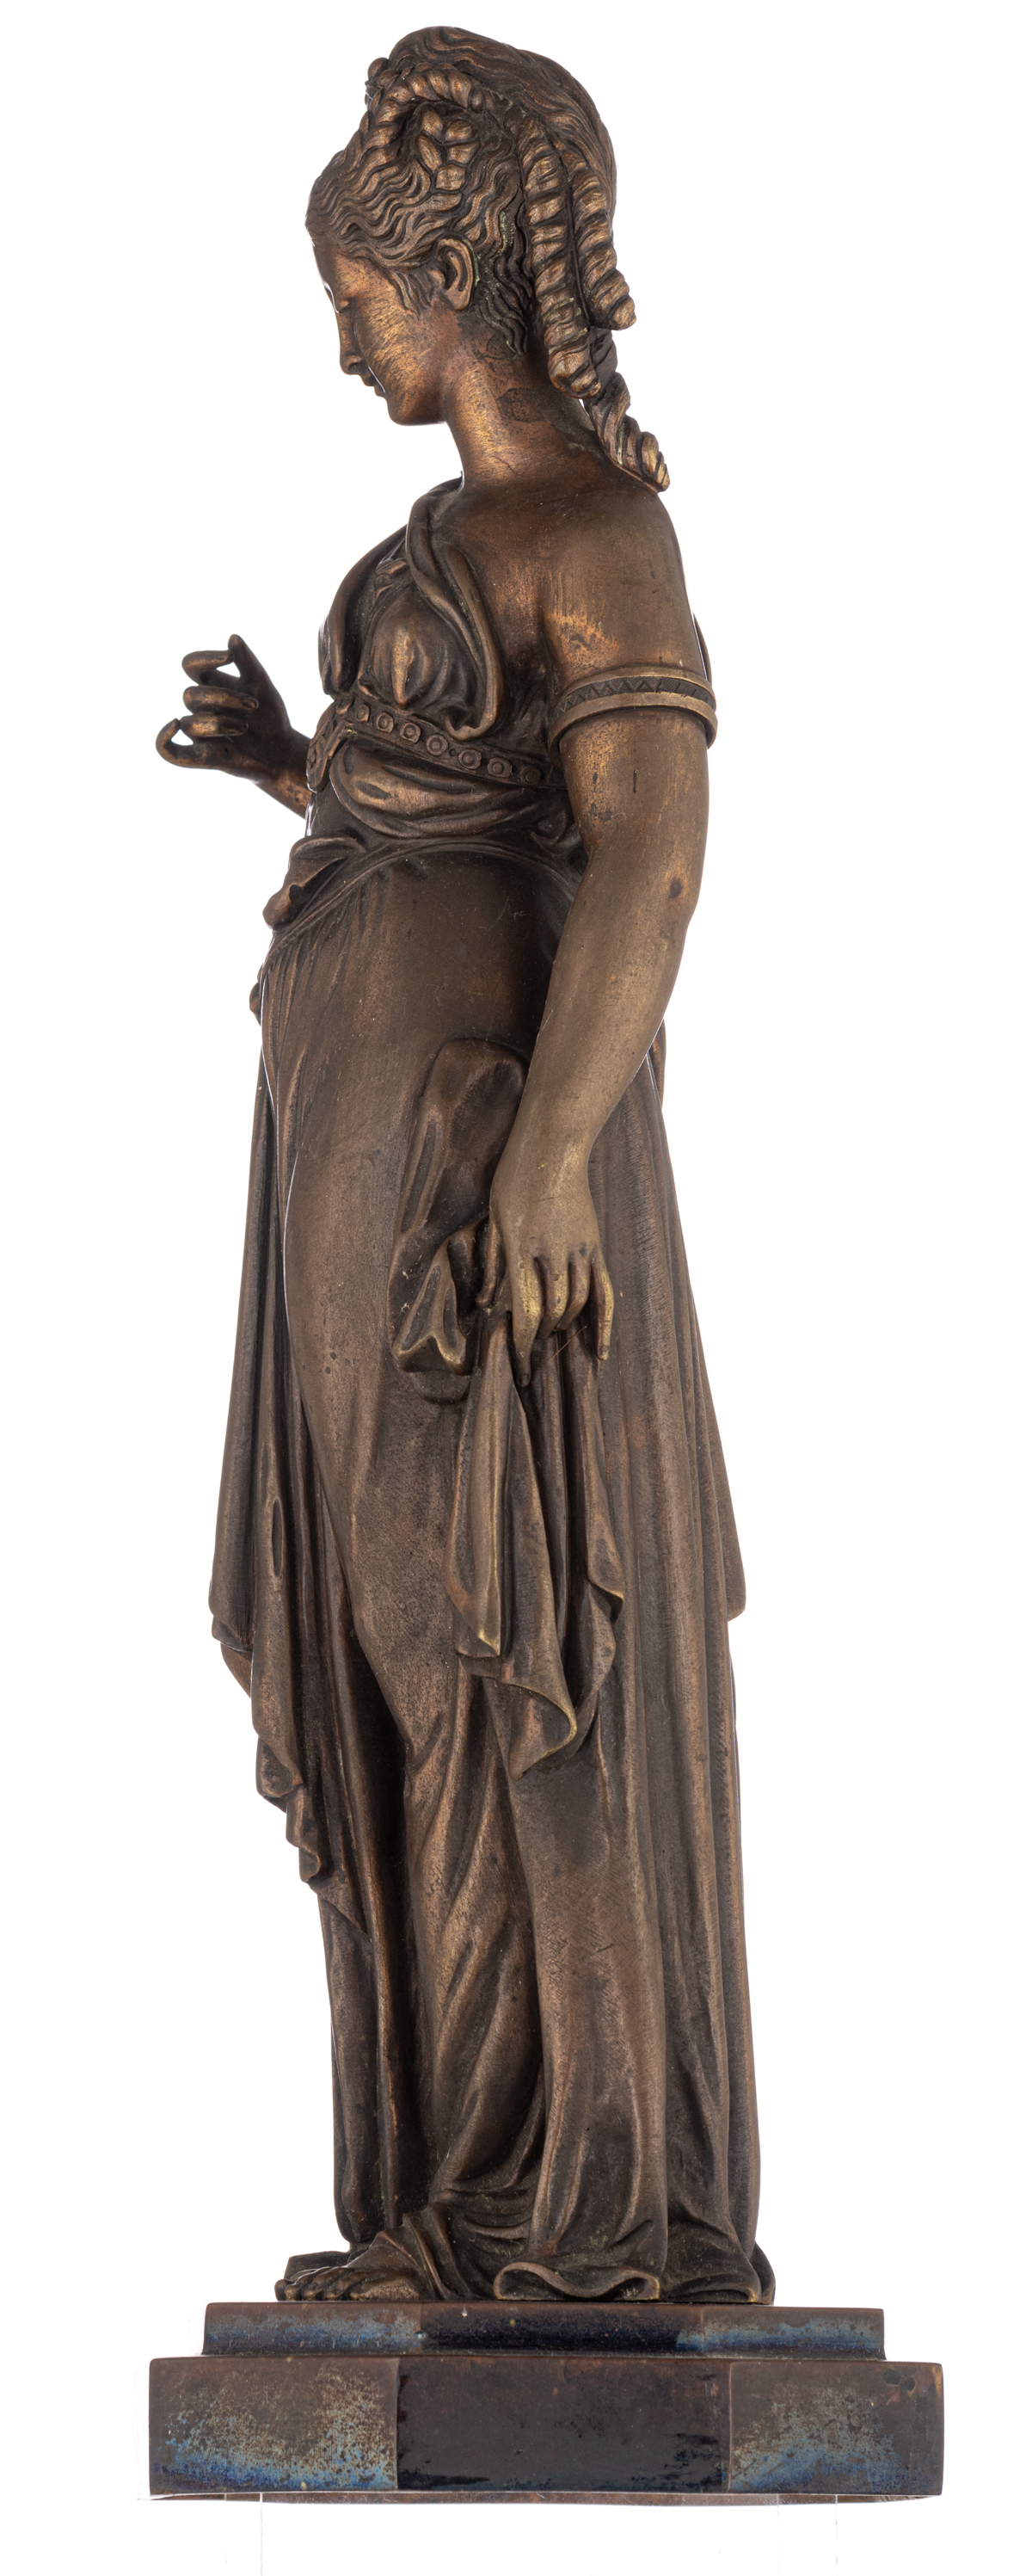 Trodoux H., Diana standing, patinated bronze, H 43 cm - Image 2 of 7